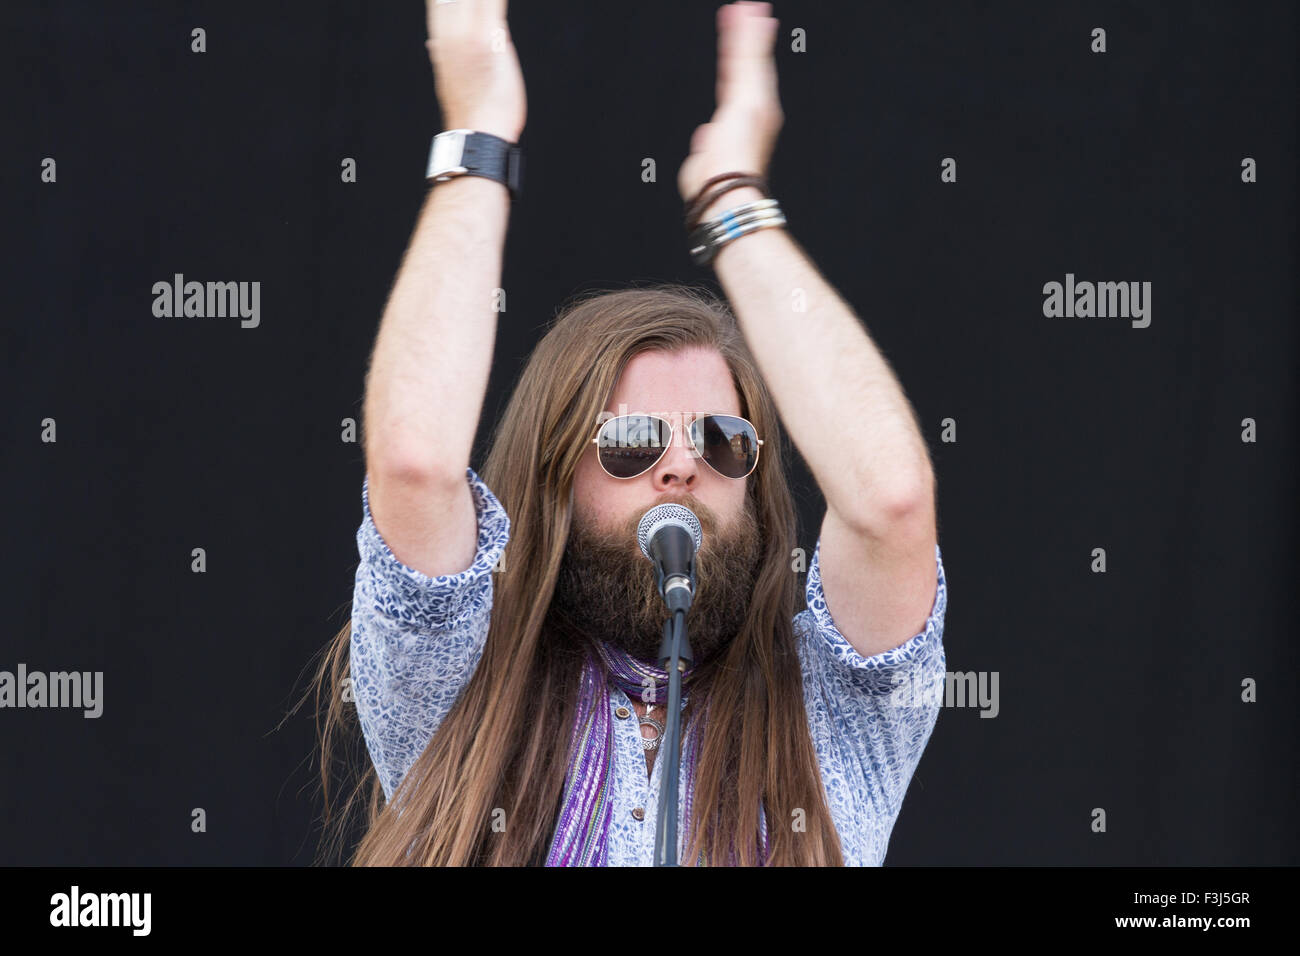 Adam Barron (The Voice UK 2013 finalist), lead singer with The Mick Ralphs Blues Band, at the 2015 Darlington R'n'B Festival Stock Photo